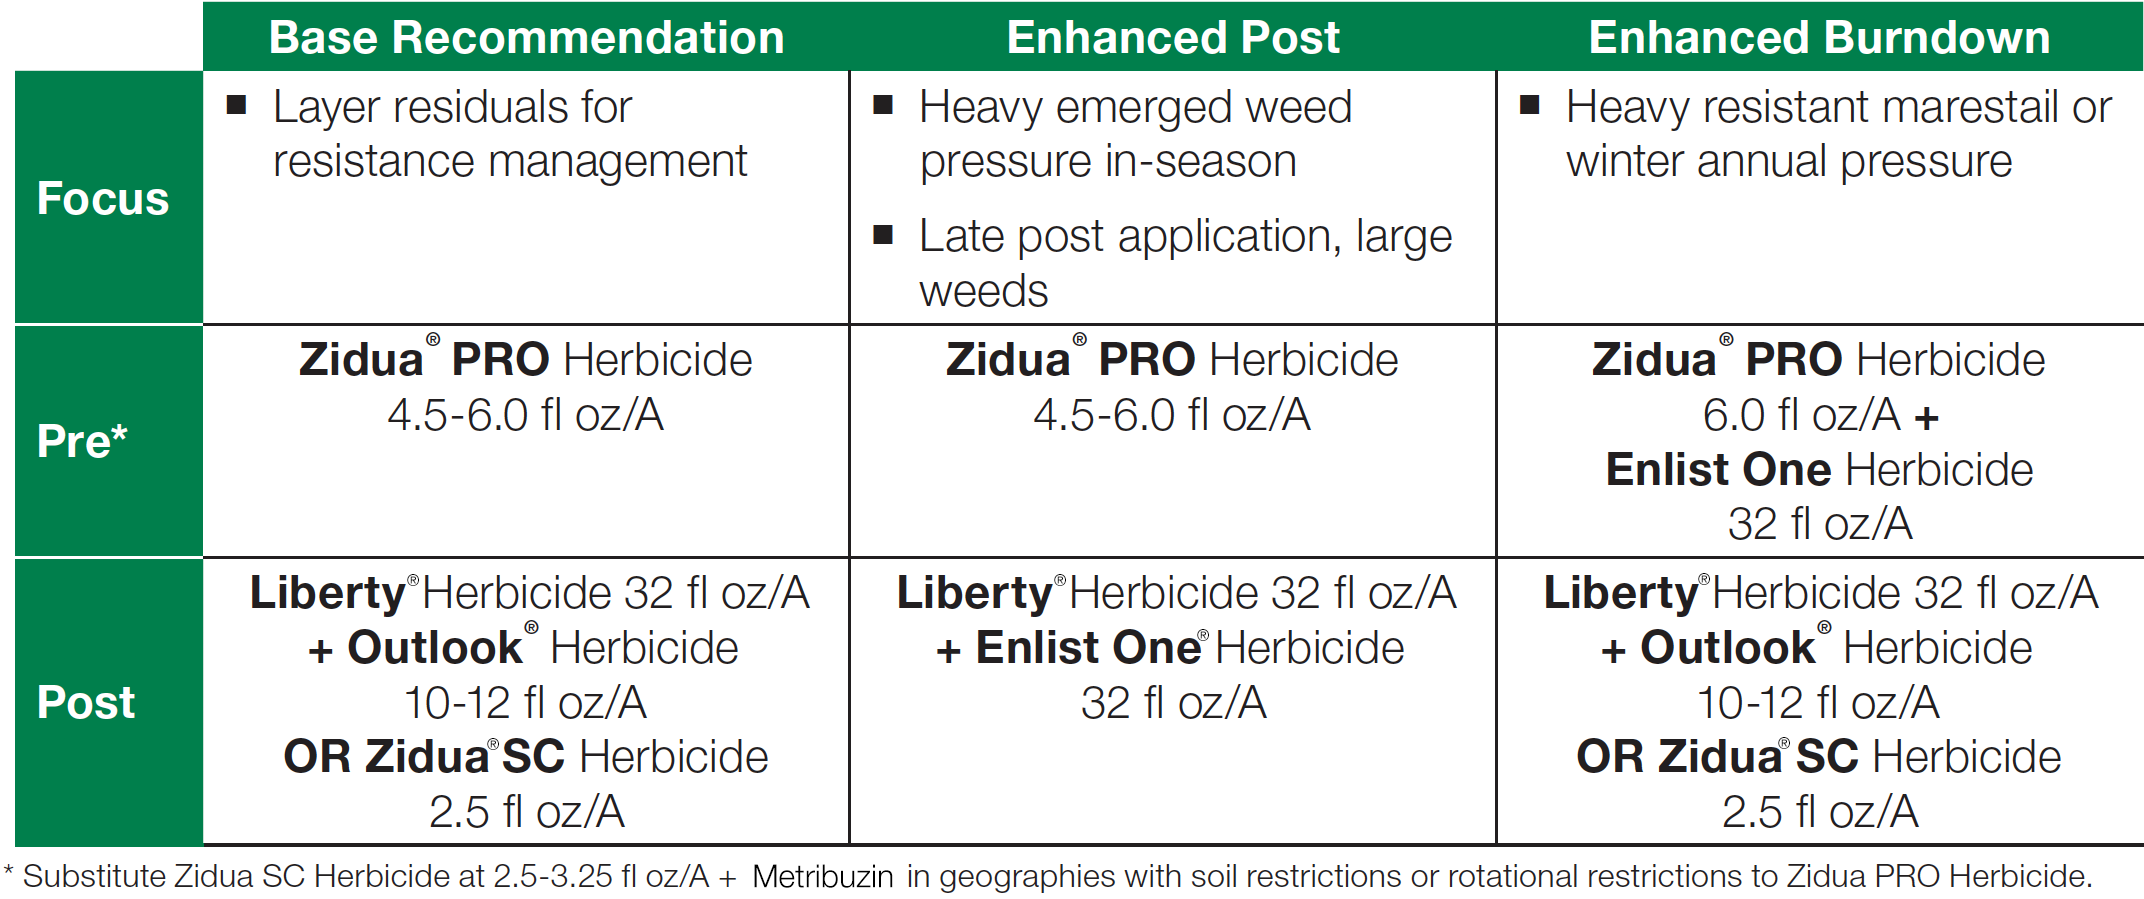 xitavo-soybean-seed-basf-herbicide-recommendations